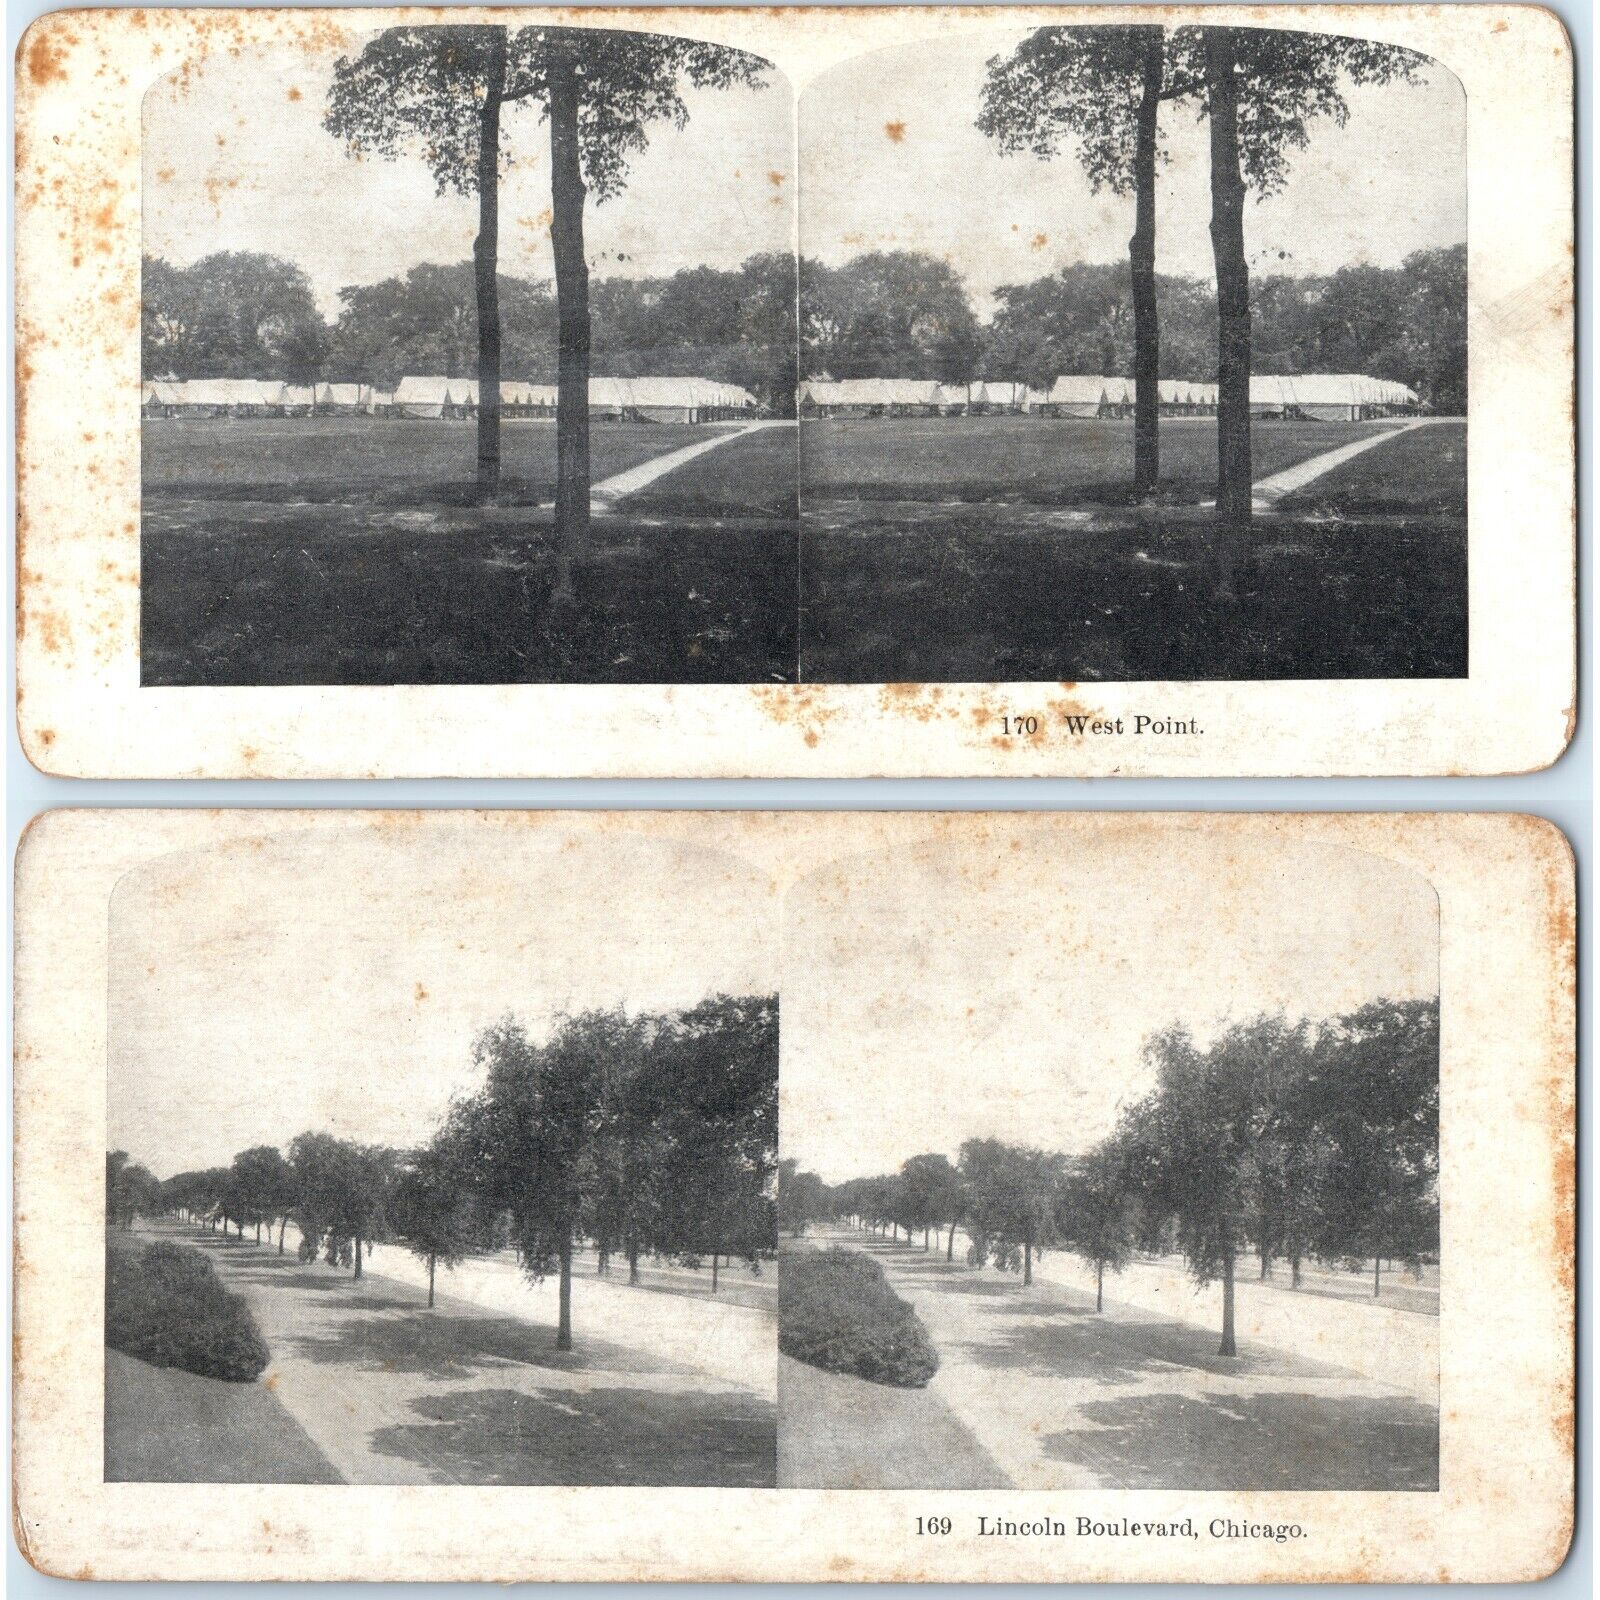 c1900s Chicago IL Lincoln Blvd / West Point Academy Double 2 Side Stereoview V42